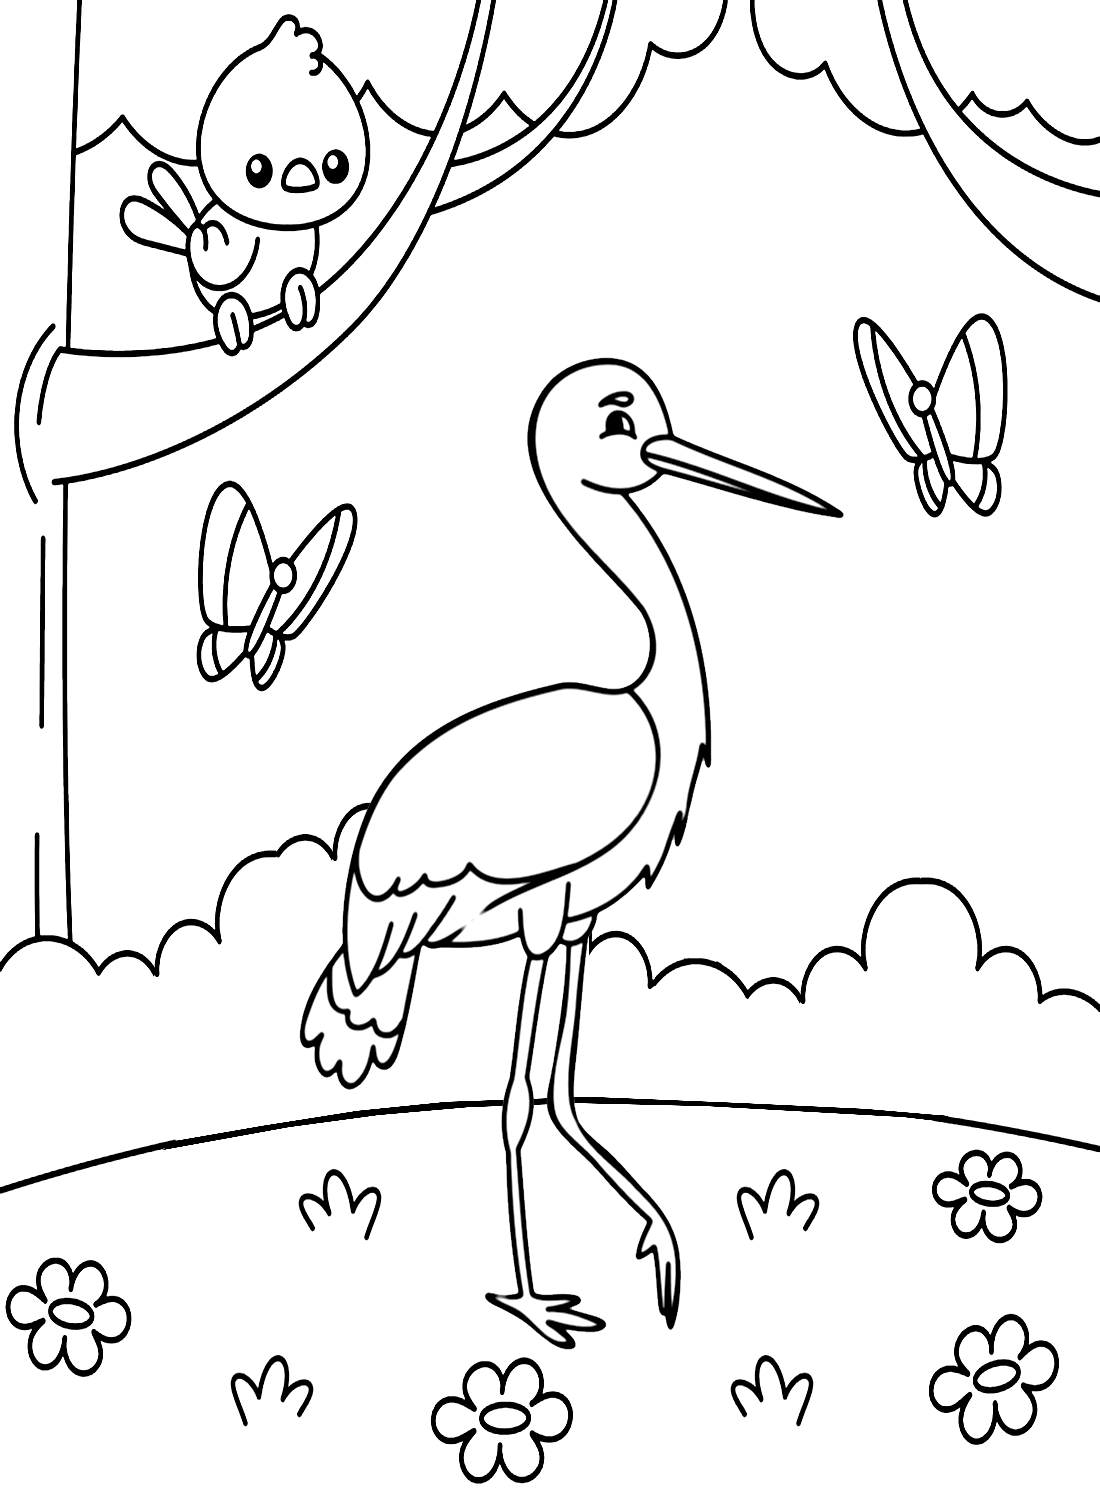 Stork with Butterfly and Bird from Stork